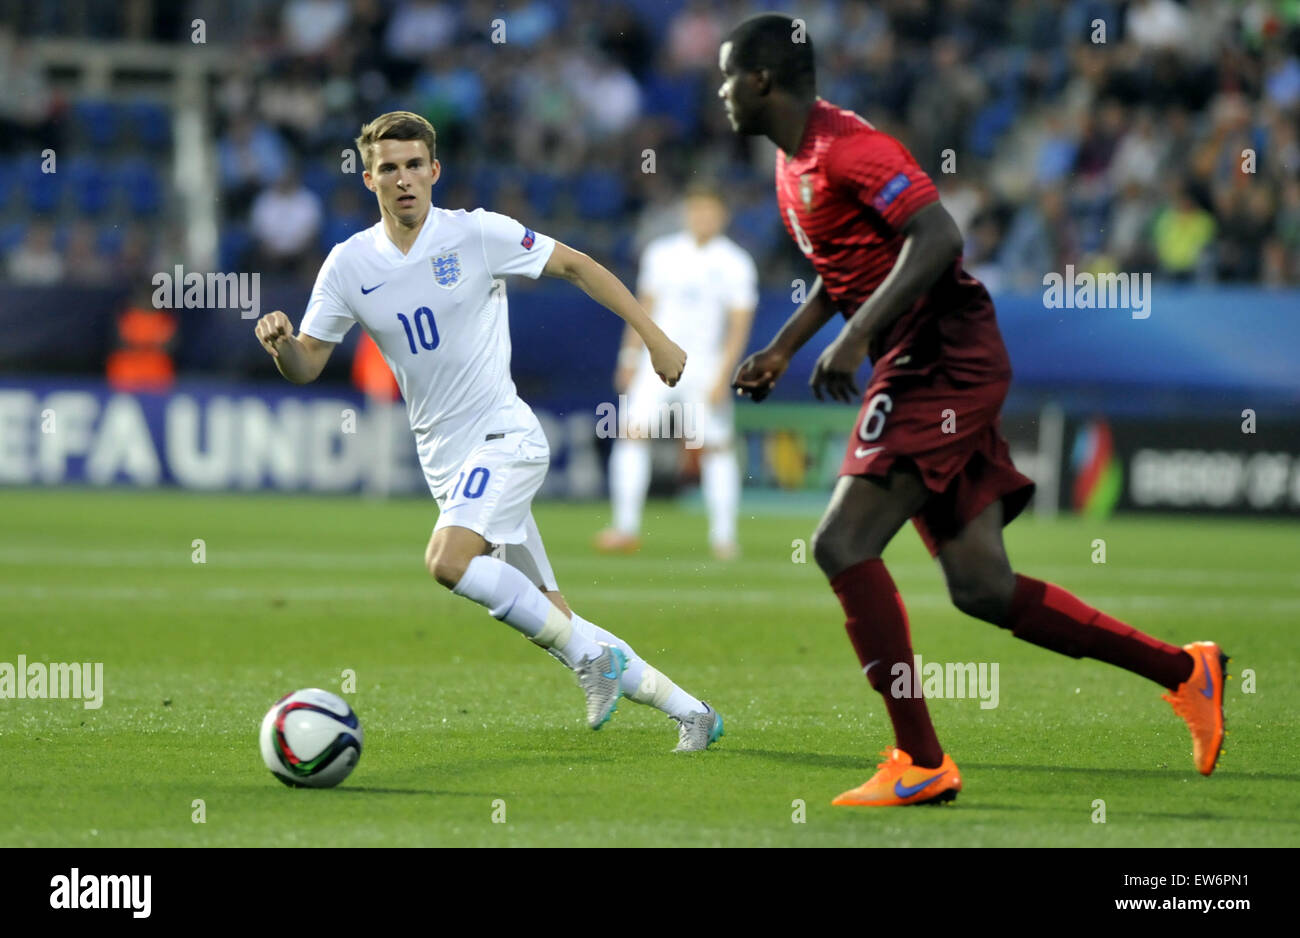 Uherske Hradiste, Czech Republic. 18th June, 2015. From left football players Tom Carroll of England and William Carvalho of Portugal fight for ball during the UEFA European U21 soccer championship group A match England vs Portugal in Uherske Hradiste, Czech Republic, June 18, 2015. © Dalibor Gluck/CTK Photo/Alamy Live News Stock Photo